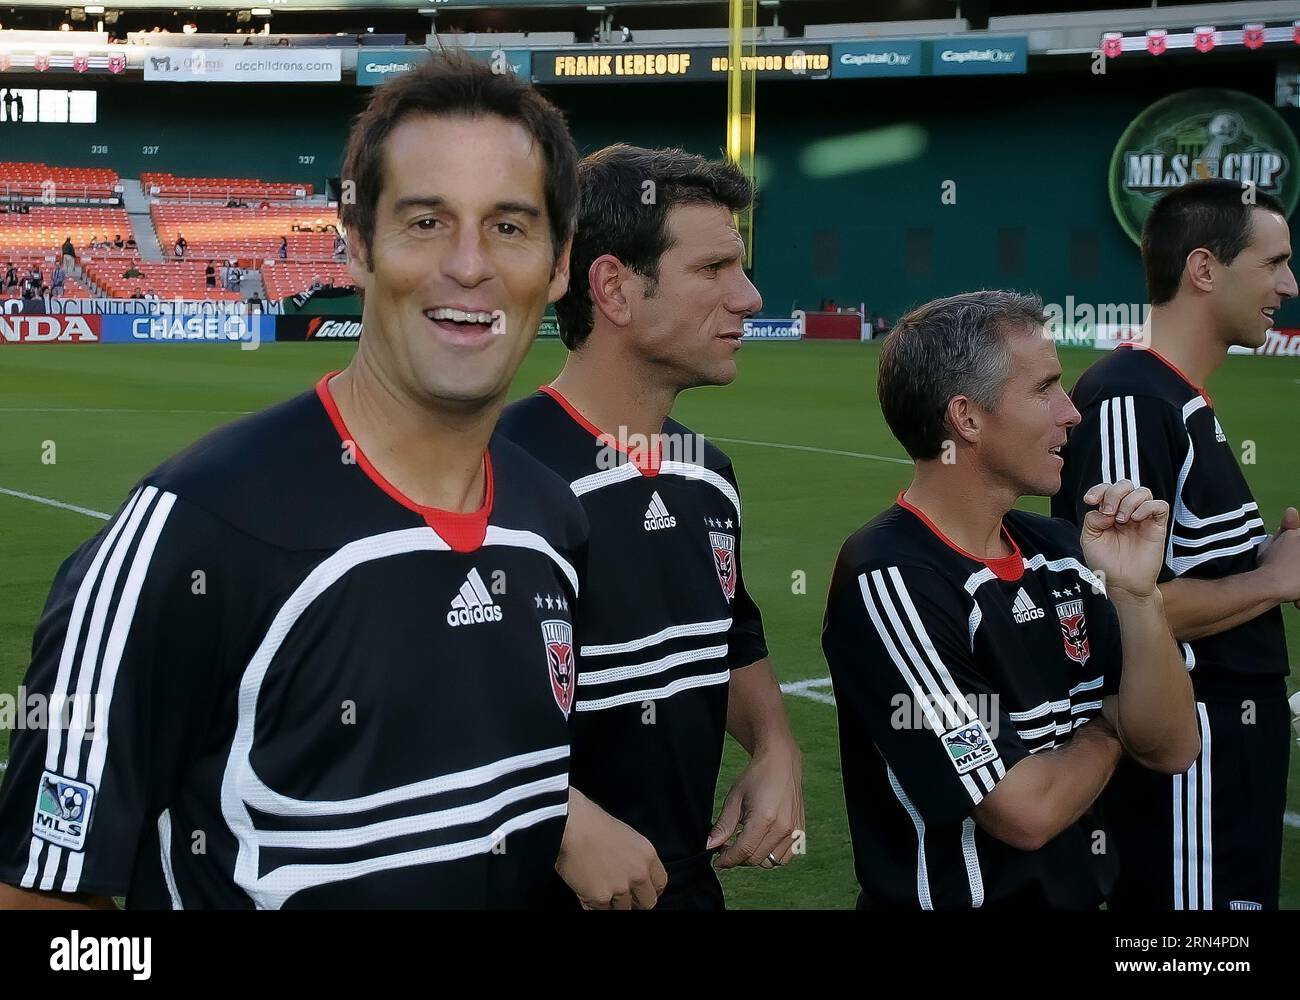 WASHINGTON - OCTOBER 20:John Harkes of DC United 1997 smiles for the camera before a tribute match for former DC United great Marco Etcheverry featuring the 1997 MLS champion DC United side and Hollywood United celebrity team before the DC United v Columbus Crew match at RFK stadium in Washington DC on october 20 2007. Stock Photo